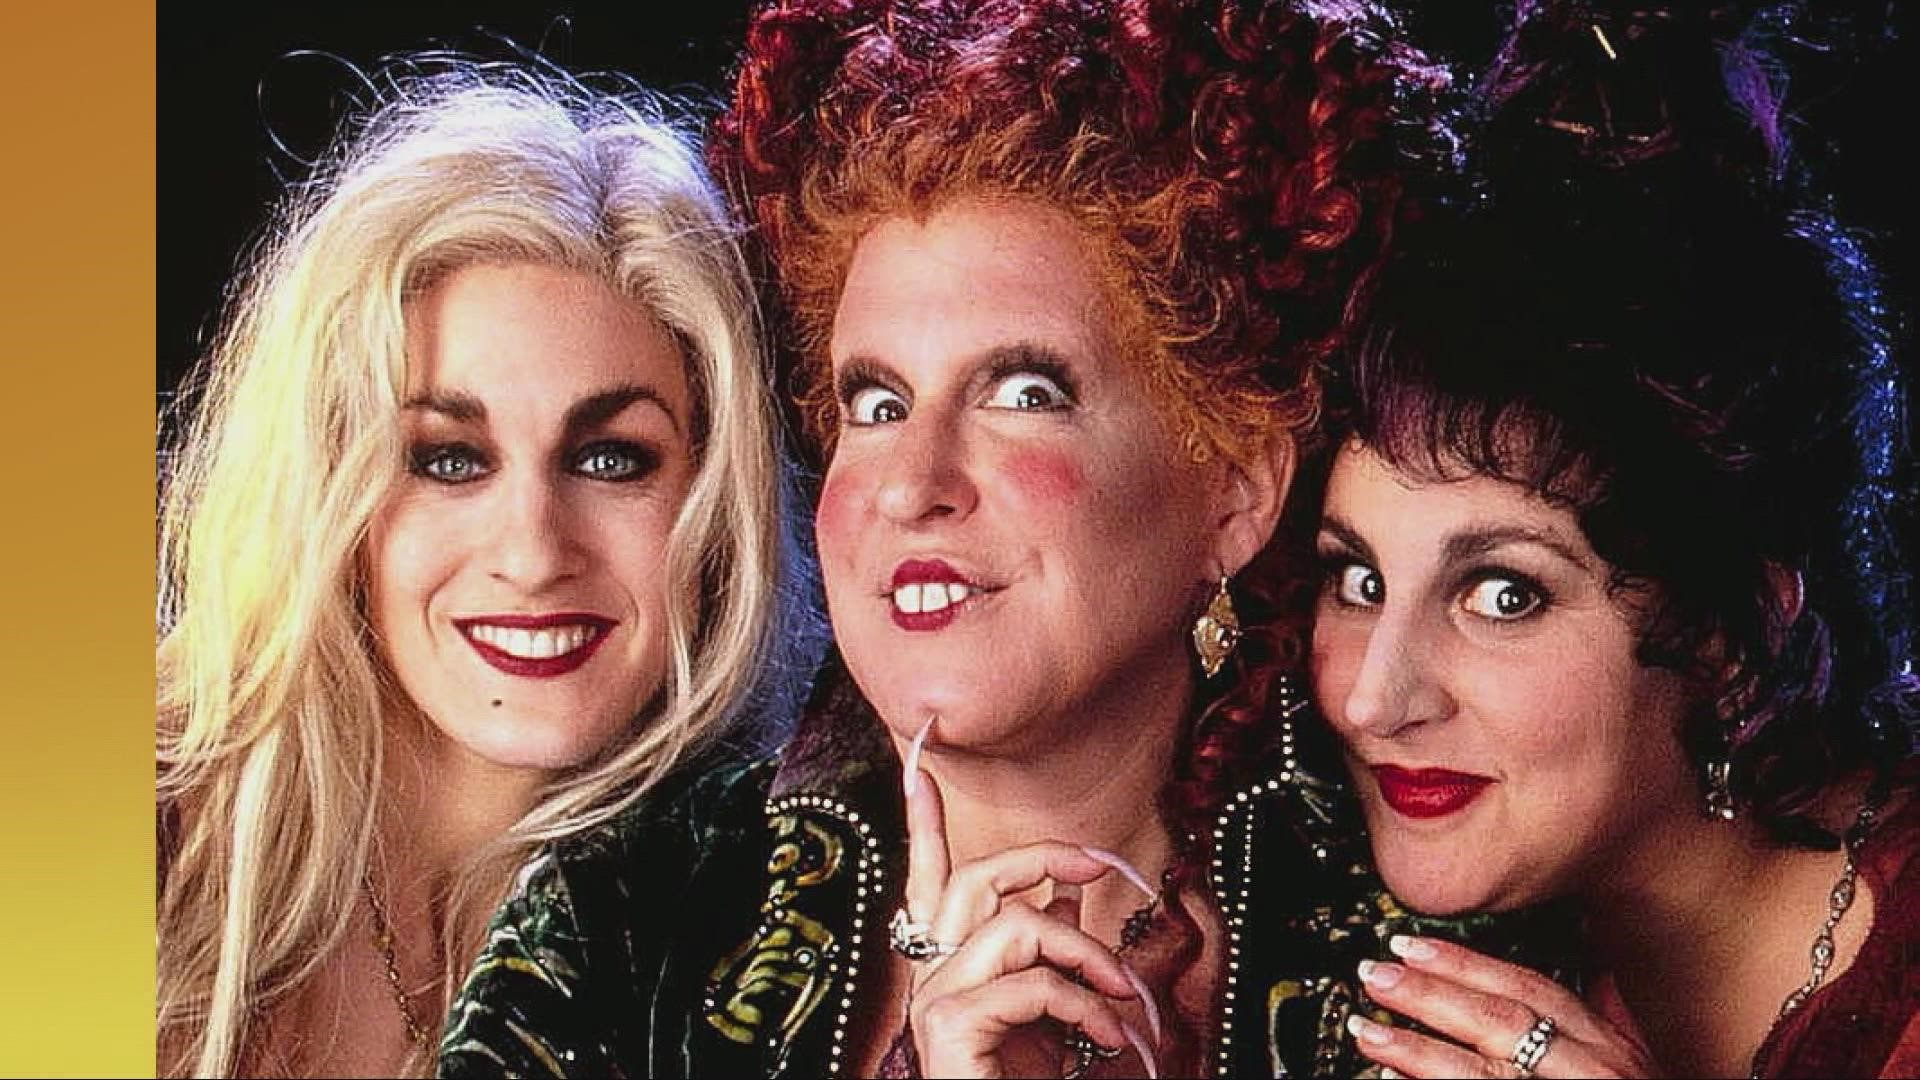 The Black Flame Candle has been lit and the Sanderson sisters are back with a vengeance.